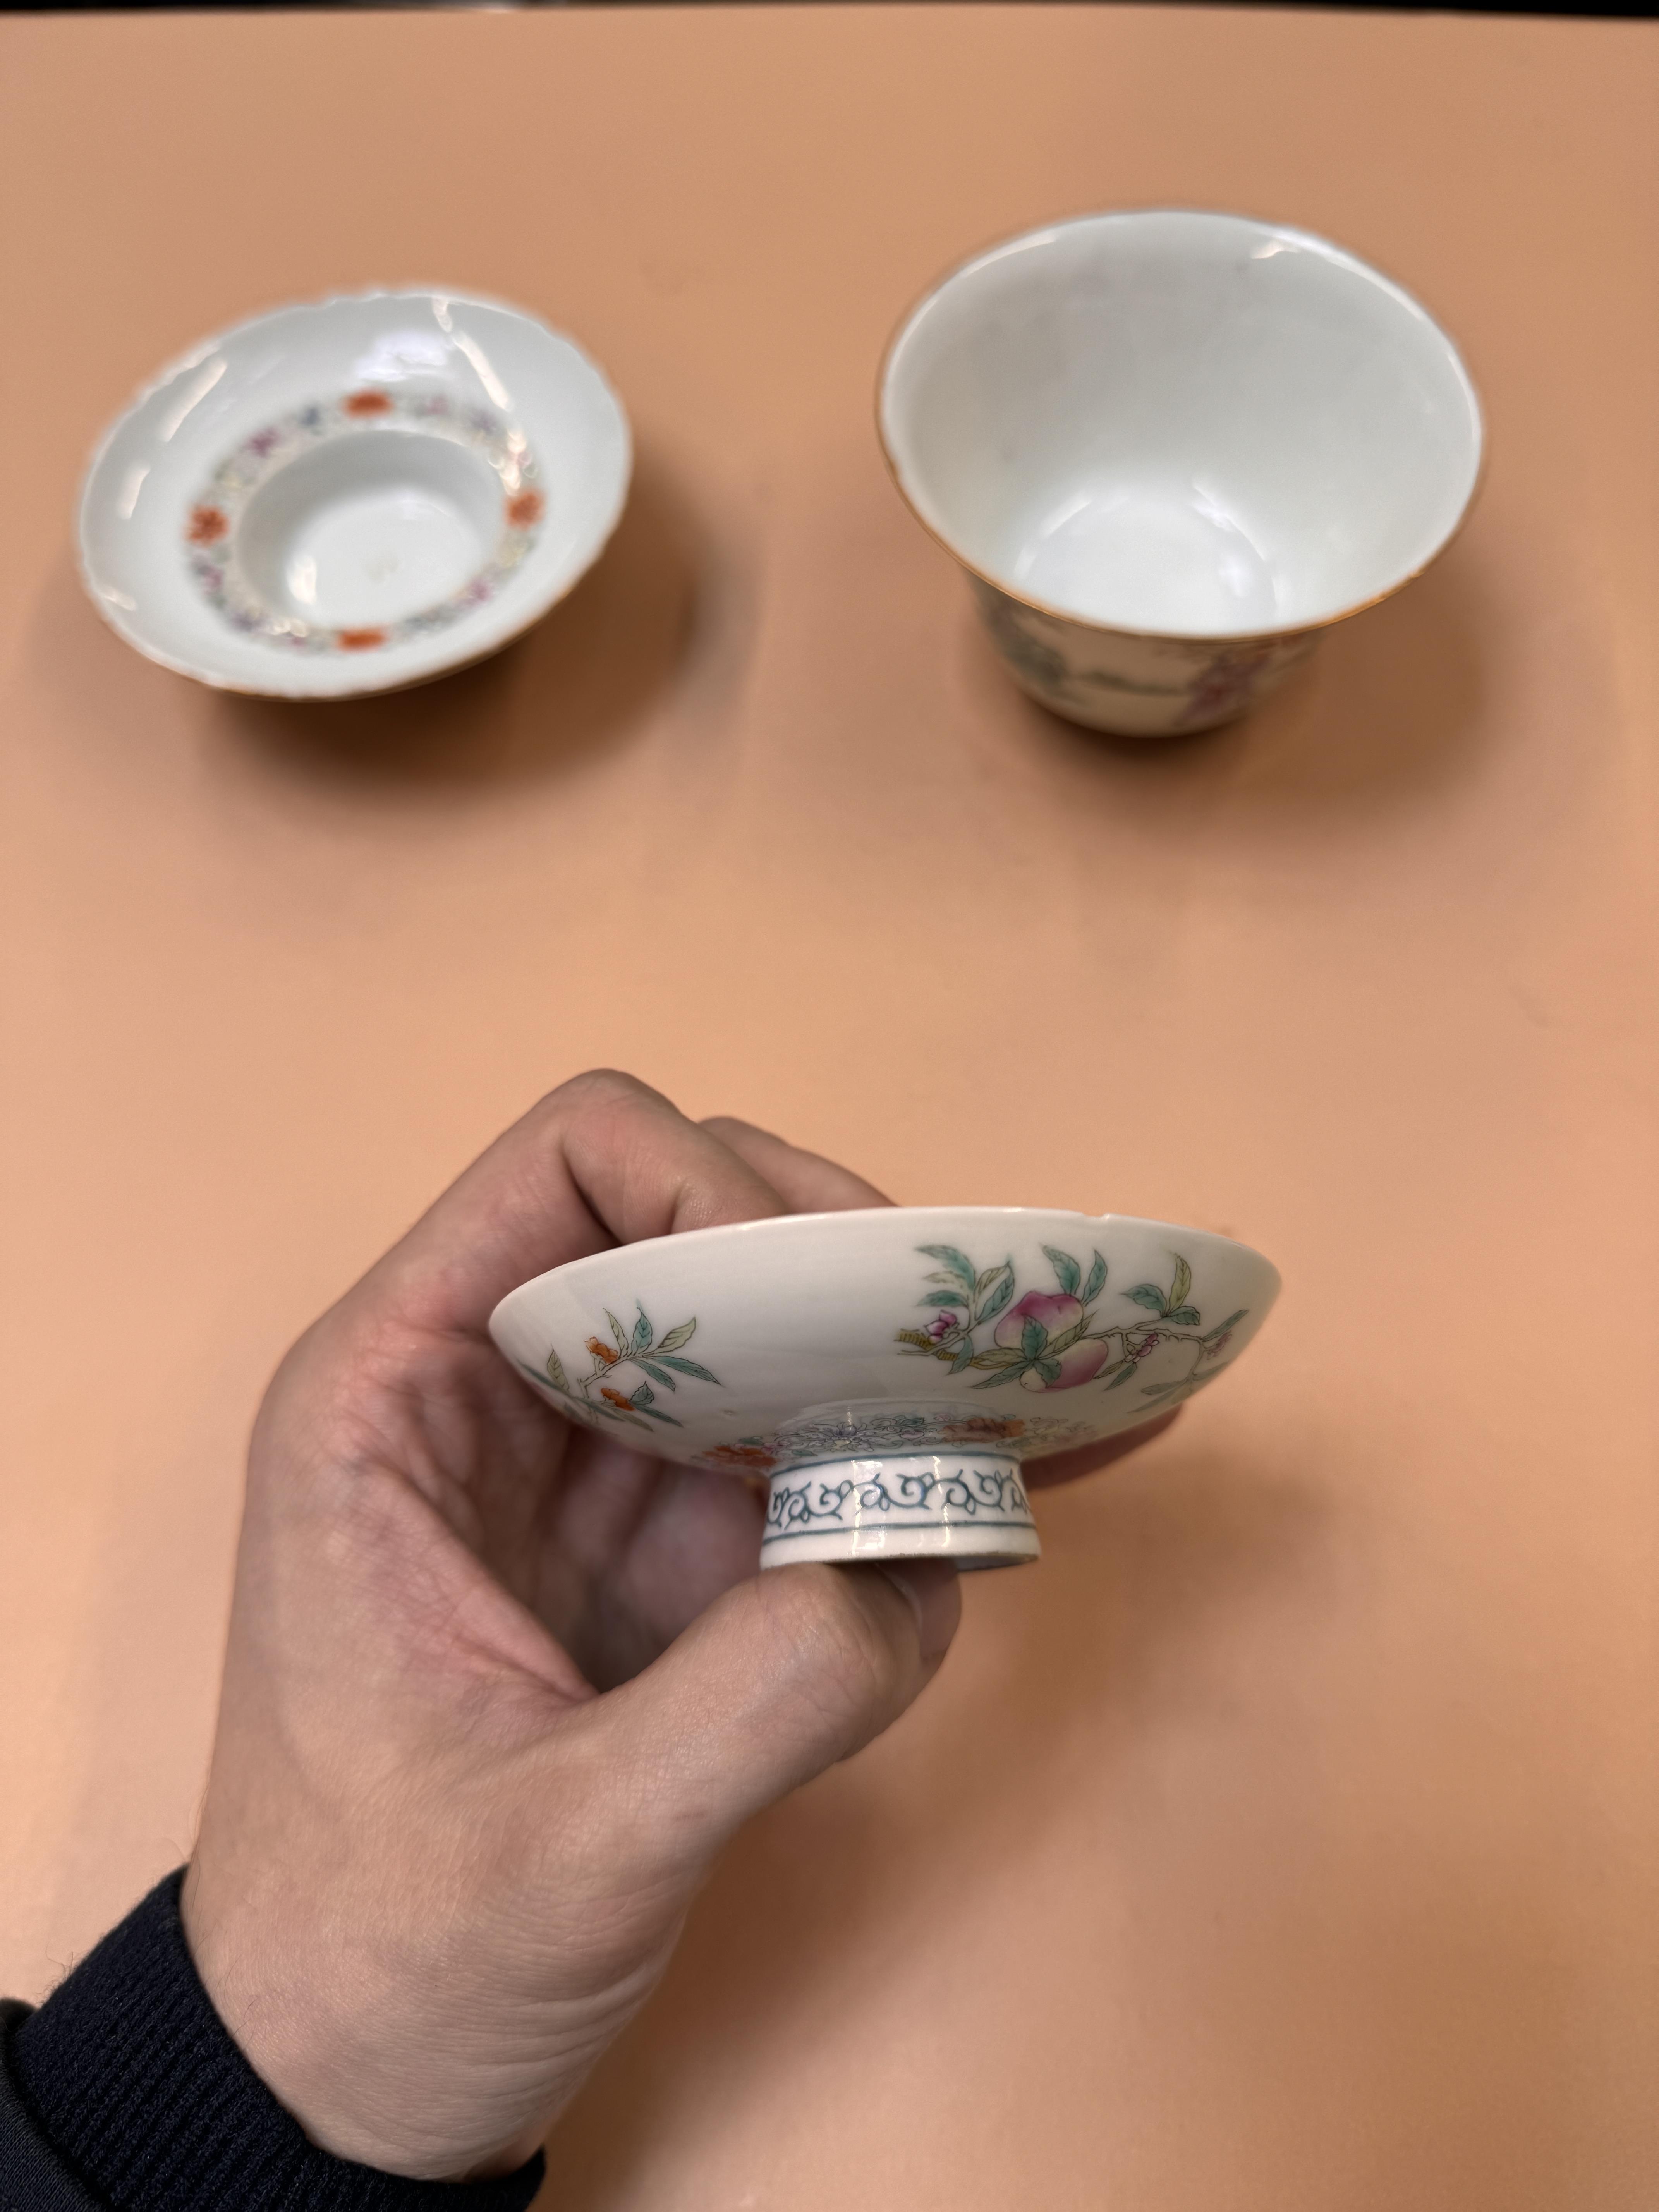 A PAIR OF CHINESE FAMILLE-ROSE CUPS, COVERS AND STANDS 民國時期 粉彩嬰戲圖蓋盌一對 《麟指呈祥》款 - Image 31 of 44